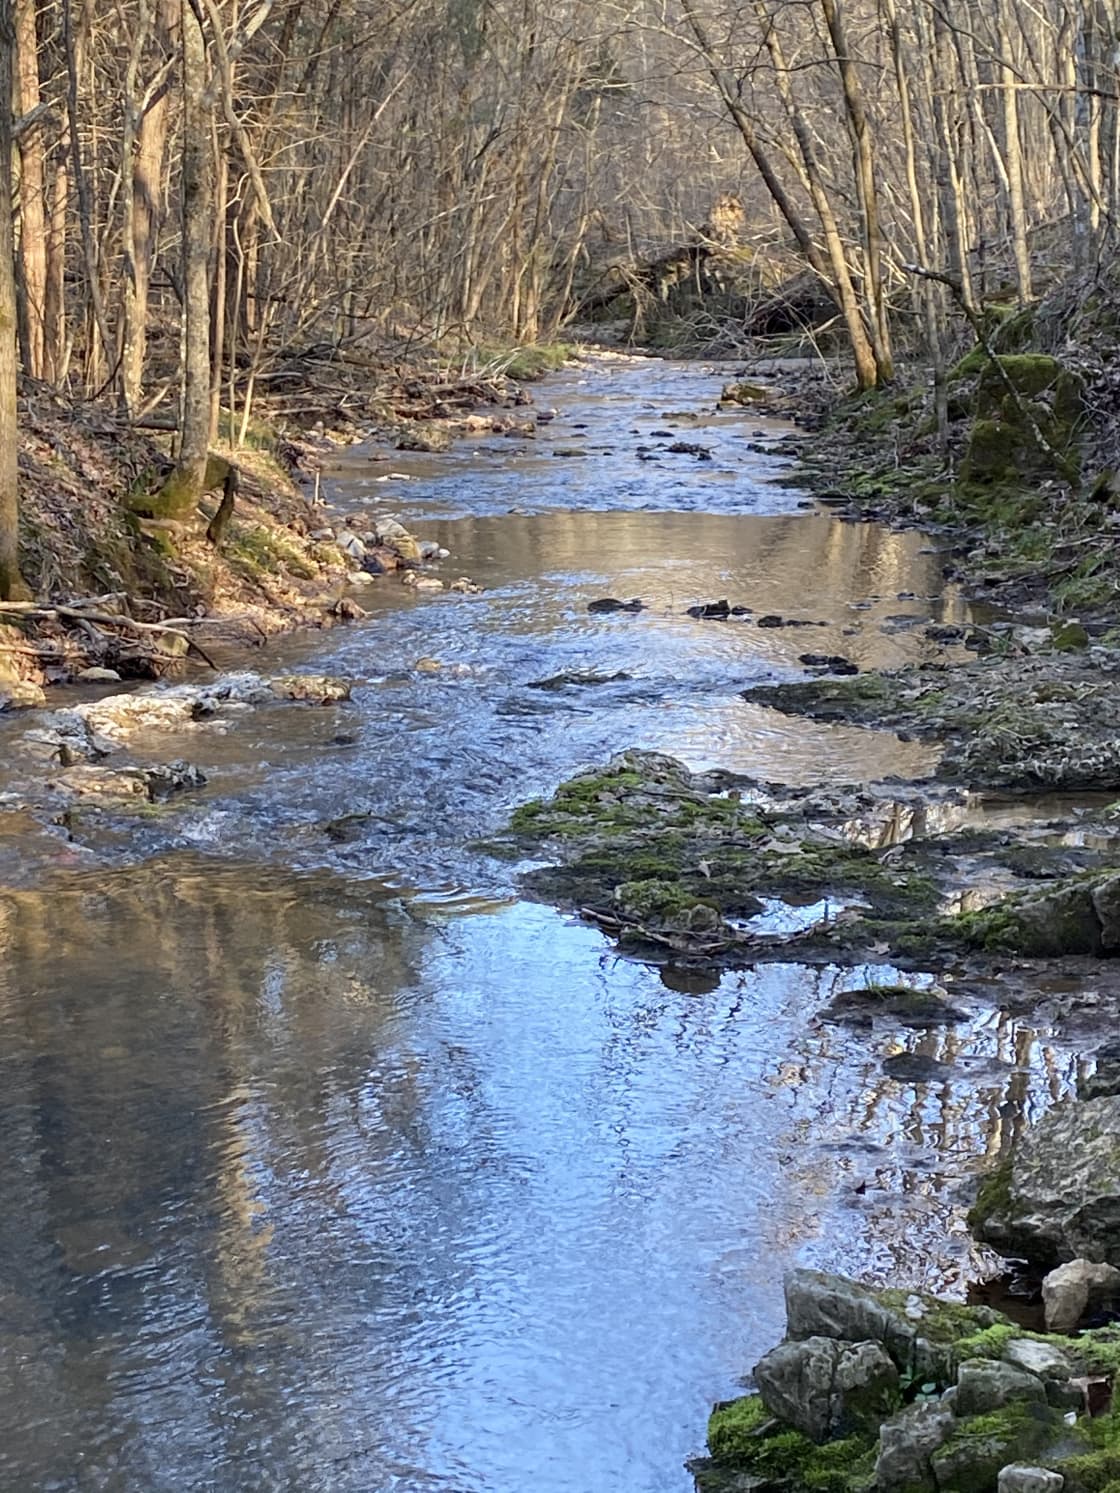 Water from springs on its way to Mill Creek